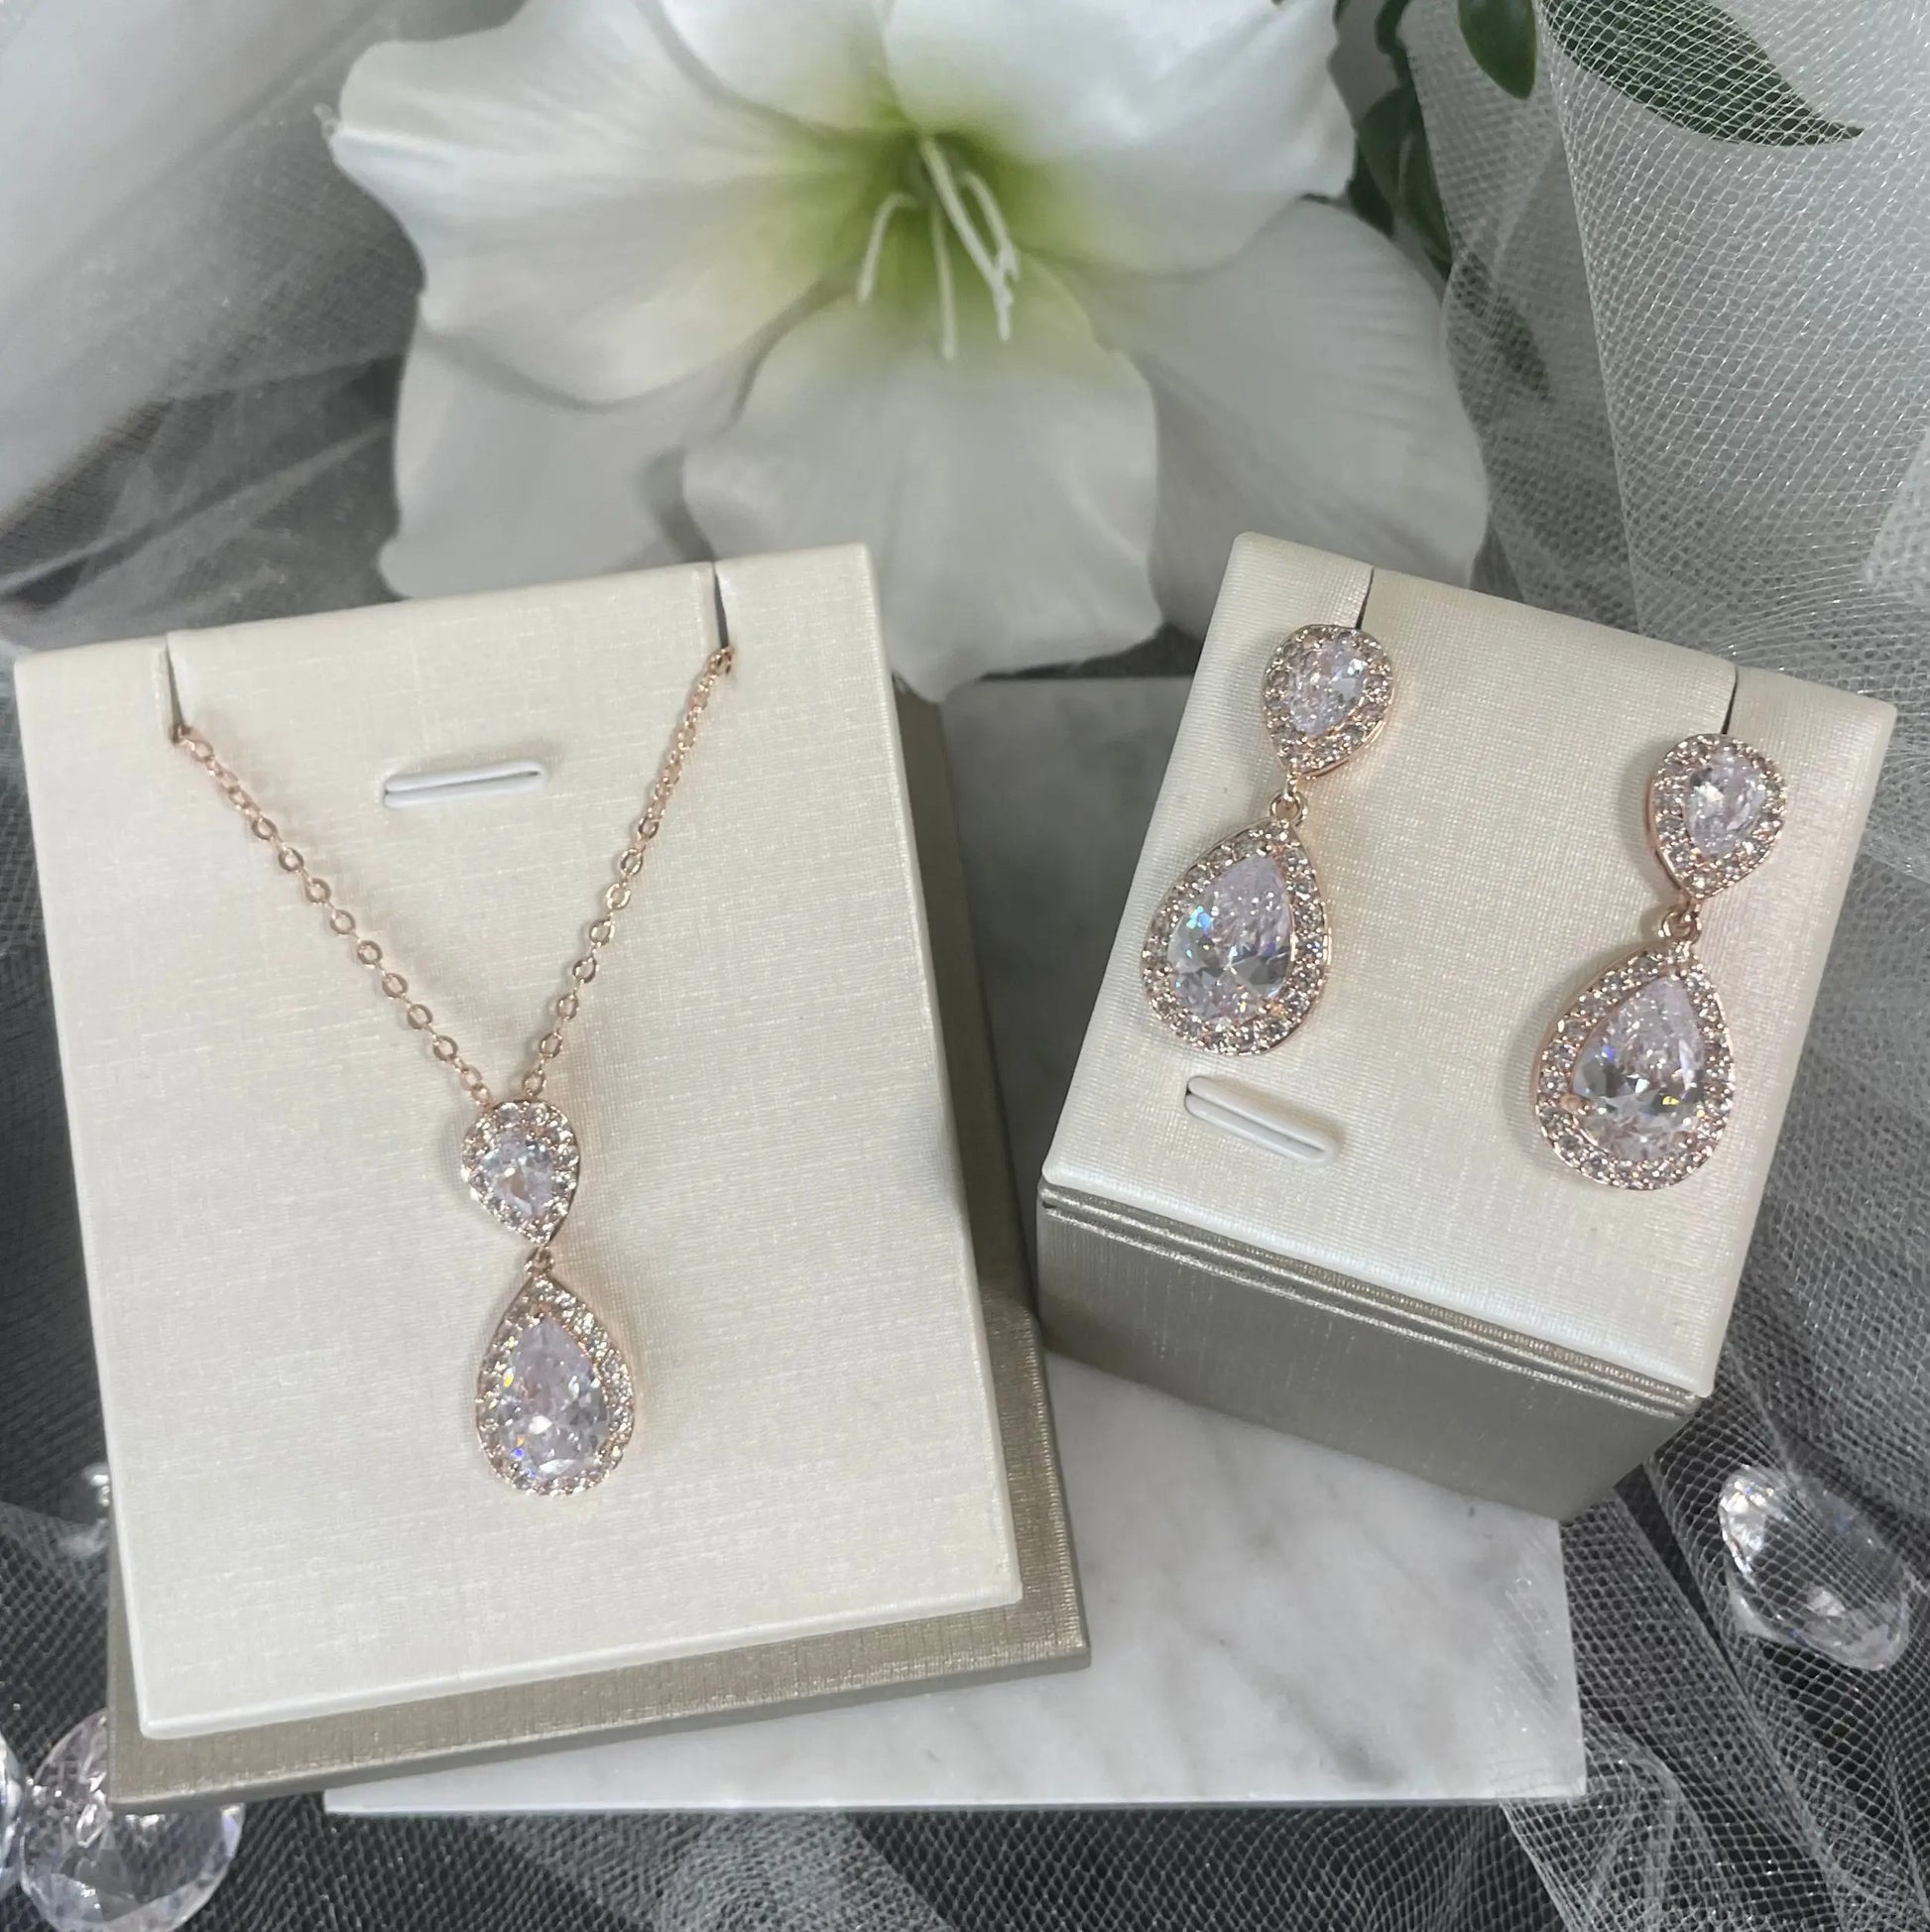 Leona Necklace & Earring Set (Rose Gold): A stunning rose gold necklace and earring set featuring large CZ stones surrounded by smaller CZs.